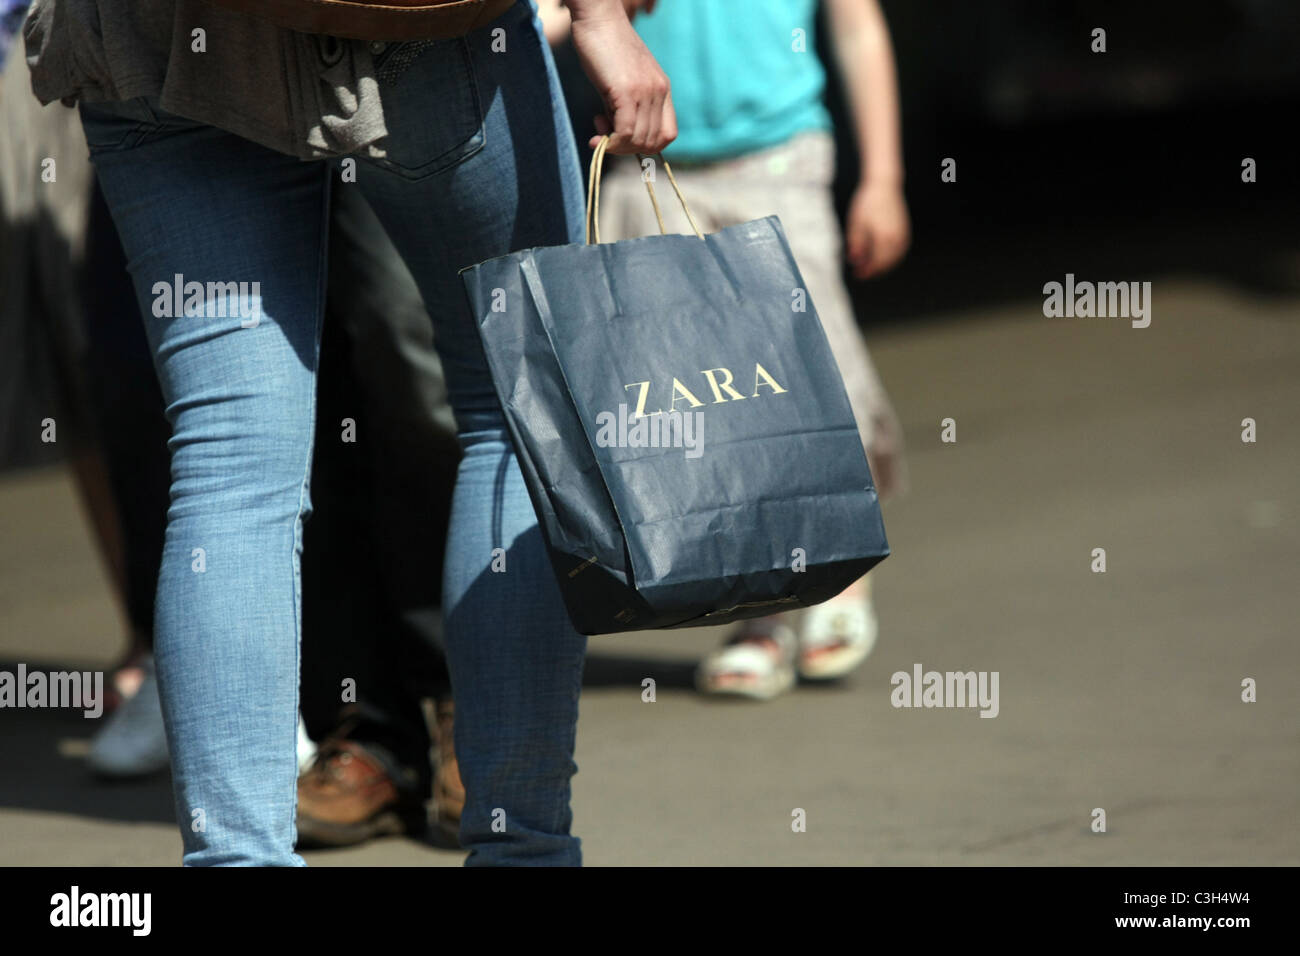 Shopping bag being carried in Oxford Street, London, England Stock ...